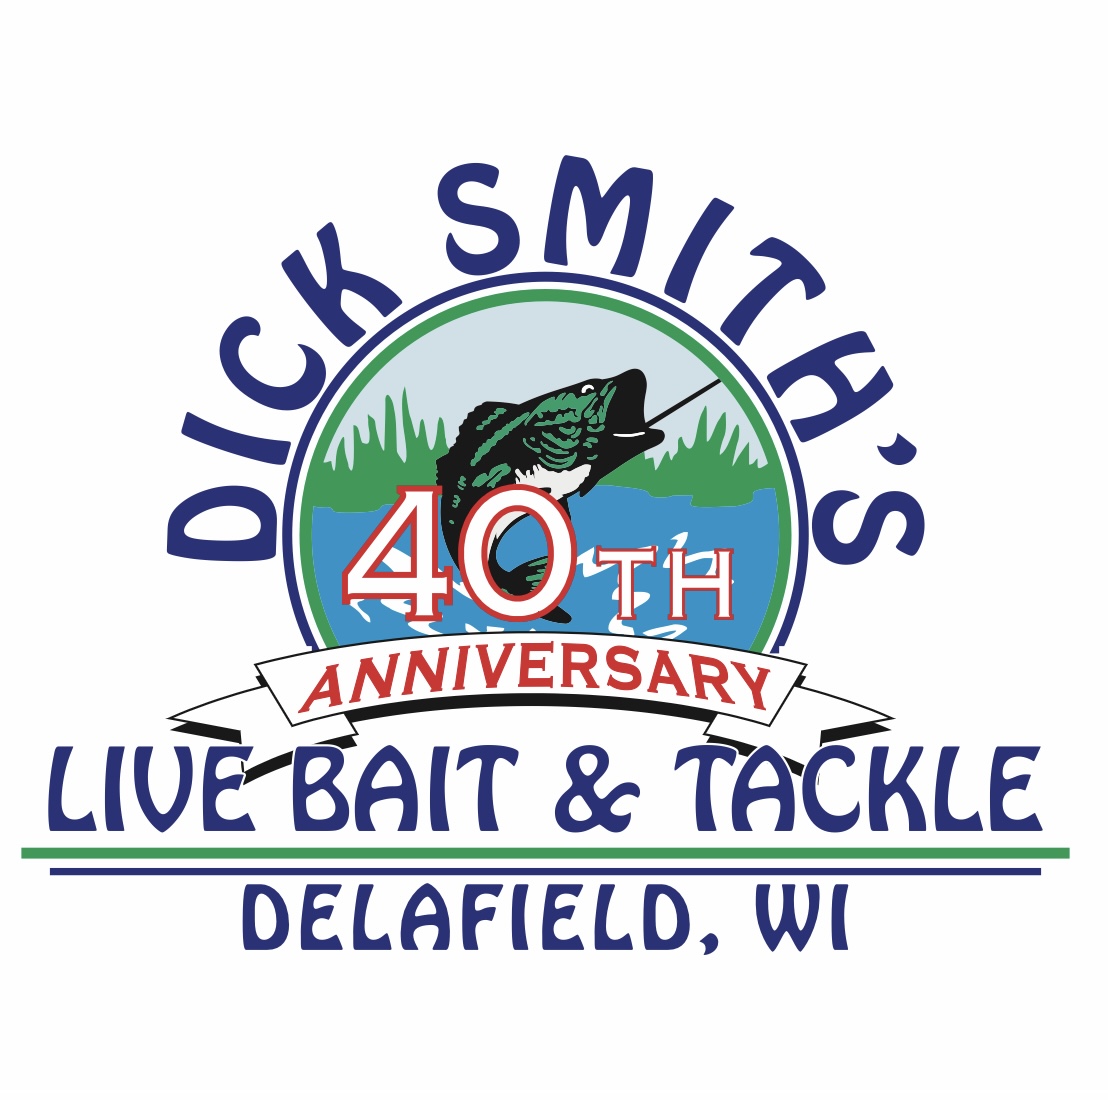 Dick Smith's Live Bait & Tackle